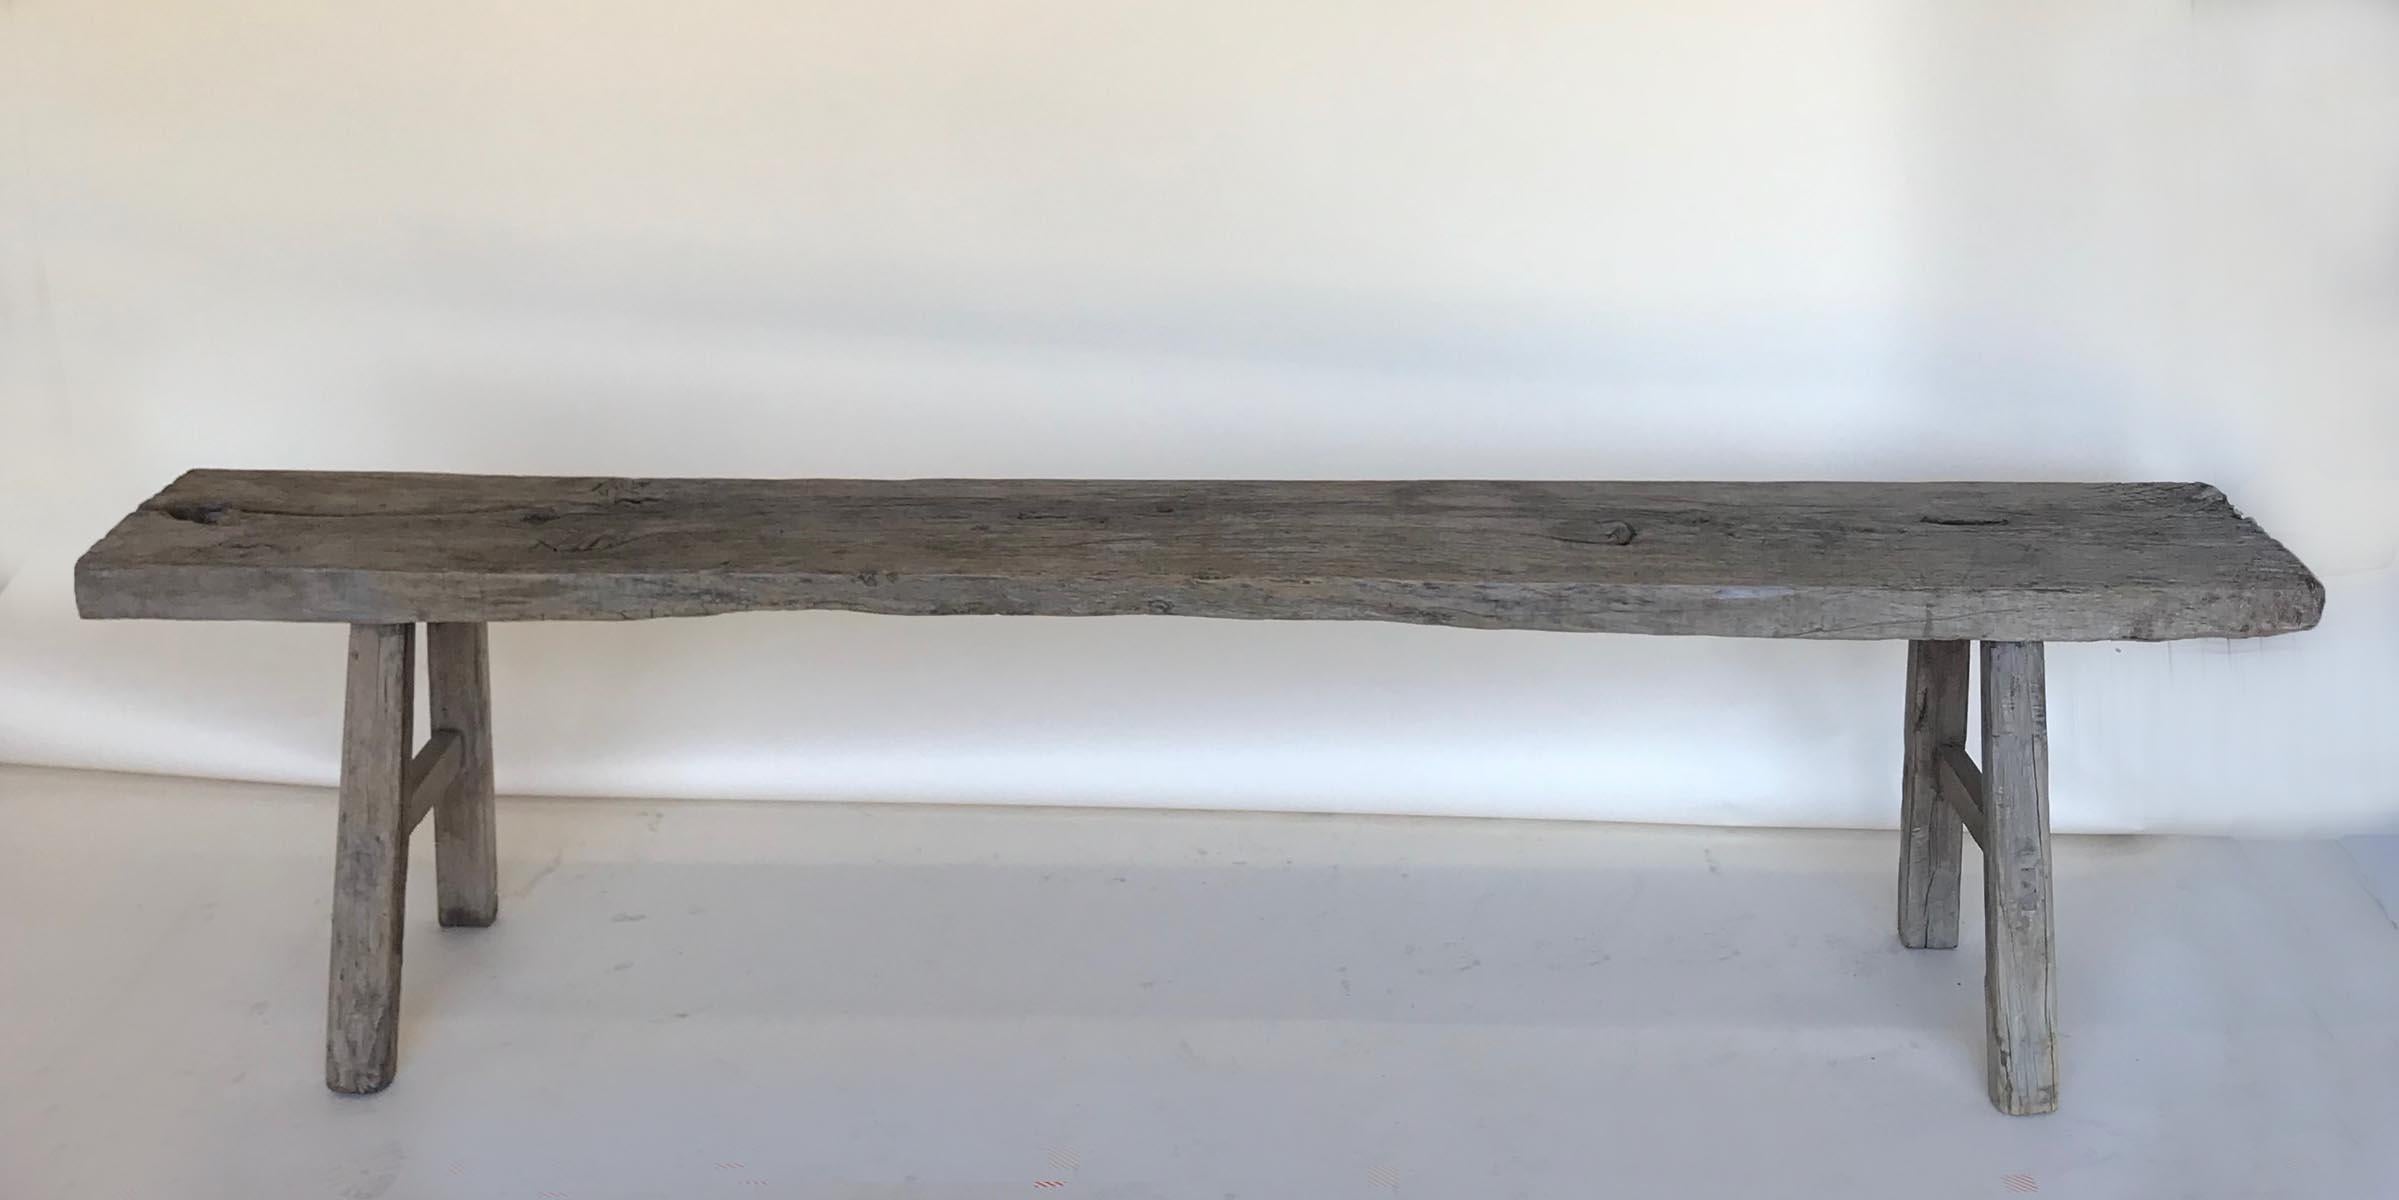 Vintage elm bench with stretchers. Mortise and tenon construction. Lovely naturally distressed, smooth patina on wood. Can work as a bench, low console or coffee table.